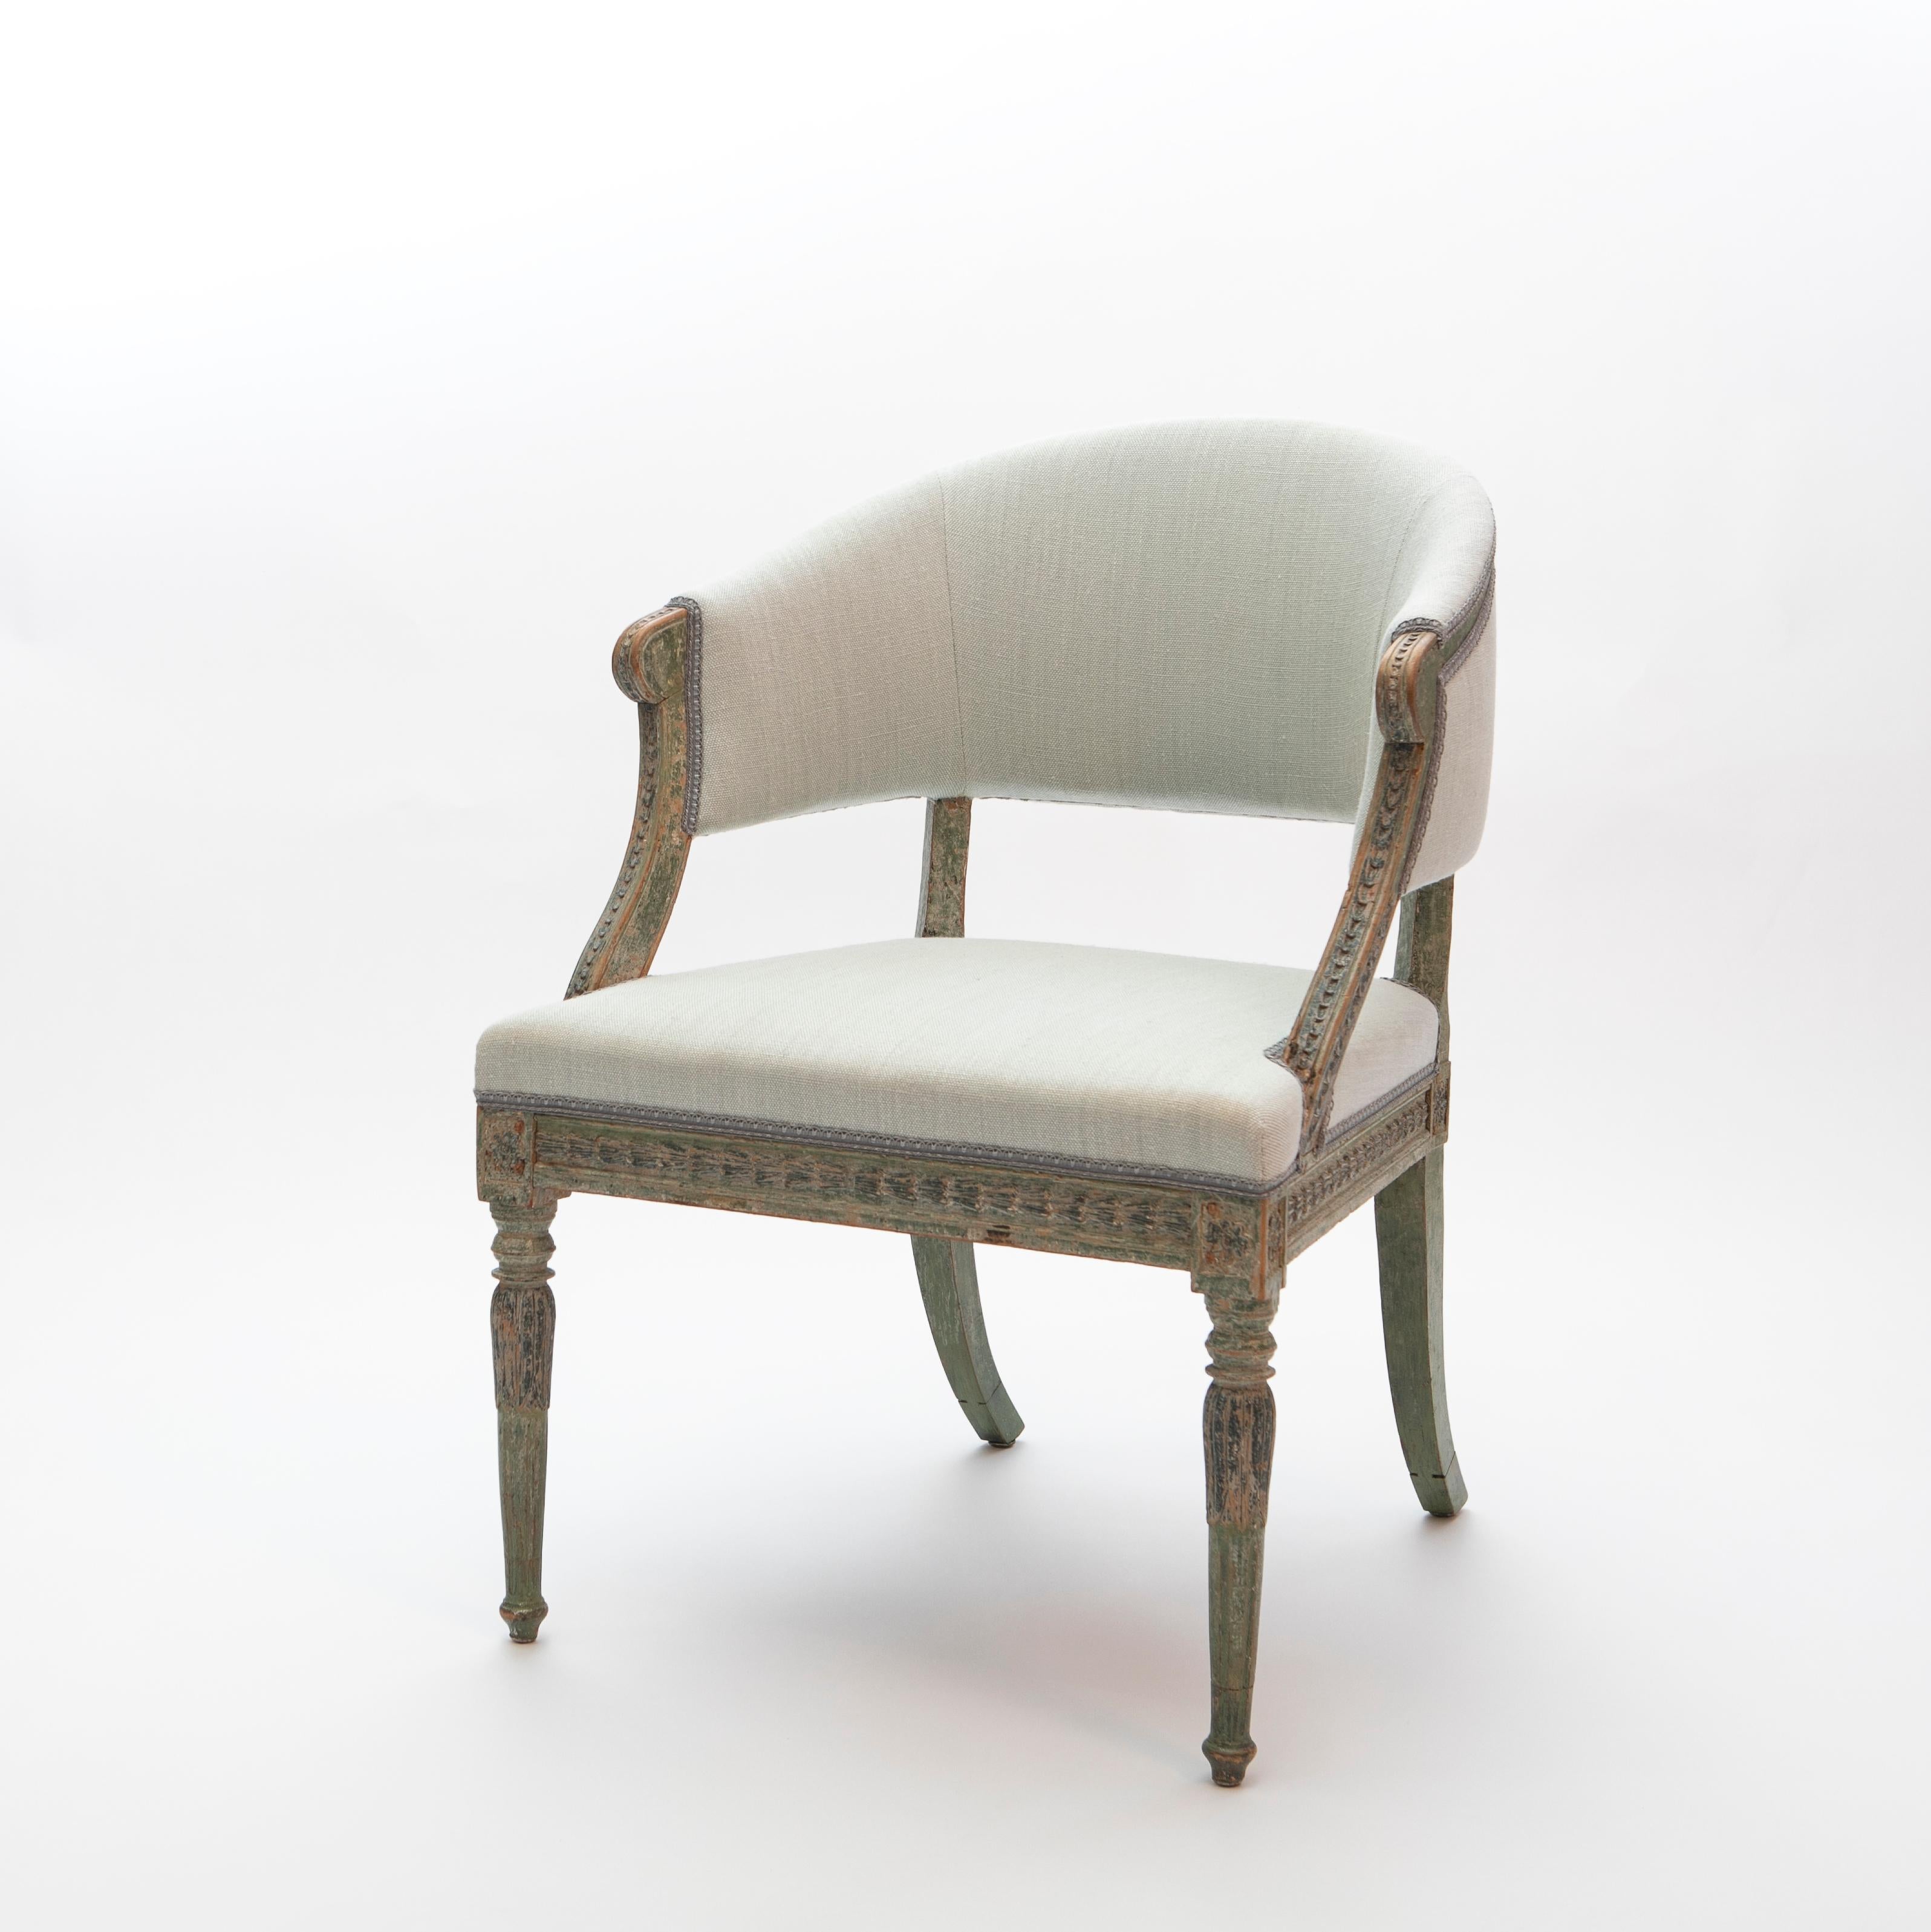 Antique Gustavian Swedish bergère chair. Scraped to its original delicate blue-green paint.
The chair features a barrel back and wood carved decor. A beautiful chair with great seating comfort.
Sweden 1780-1790.

Newly upholstered in pale green